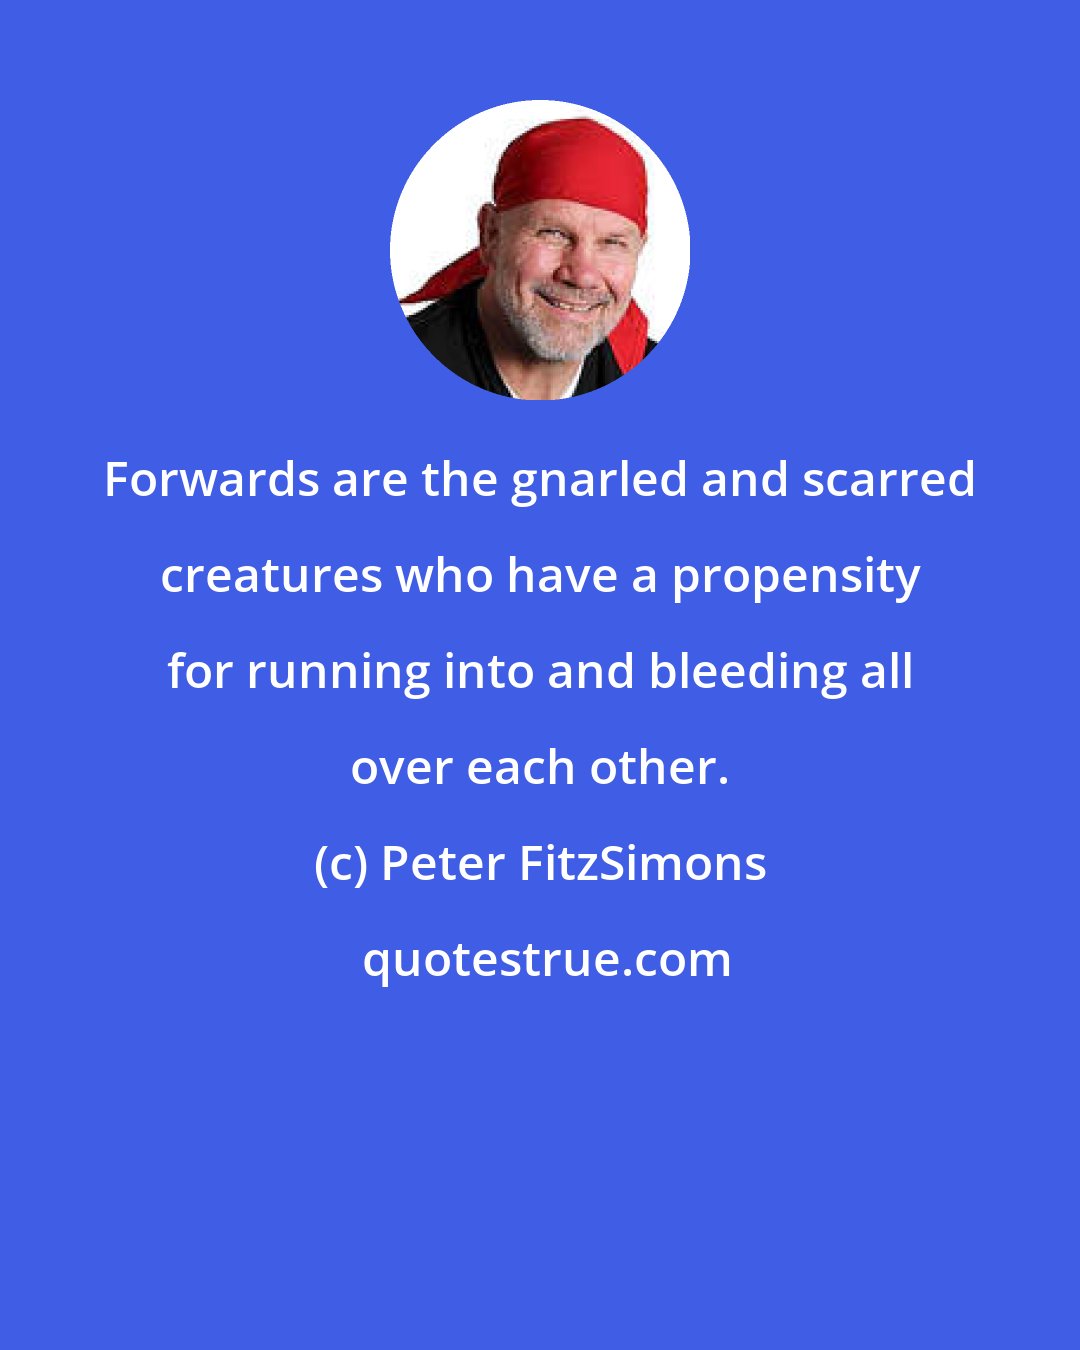 Peter FitzSimons: Forwards are the gnarled and scarred creatures who have a propensity for running into and bleeding all over each other.